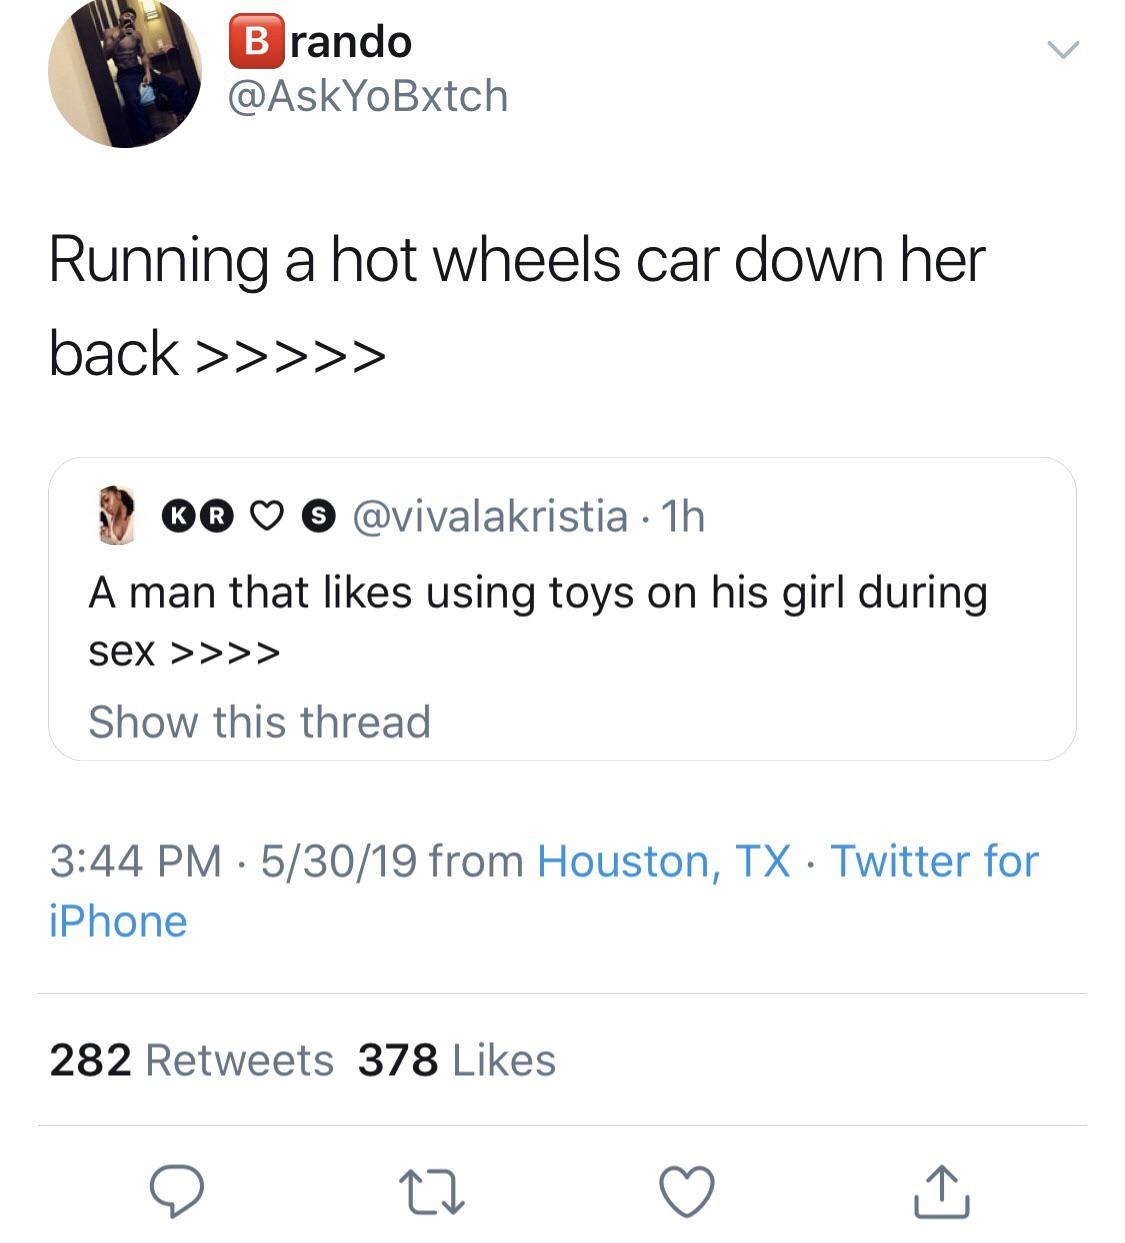 B rando Running a hot wheels car down her back >>>>> 0 0 6 1h A man that using toys on his girl during sex >>>> Show this thread 53019 from Houston, Tx Twitter for iPhone 282 378